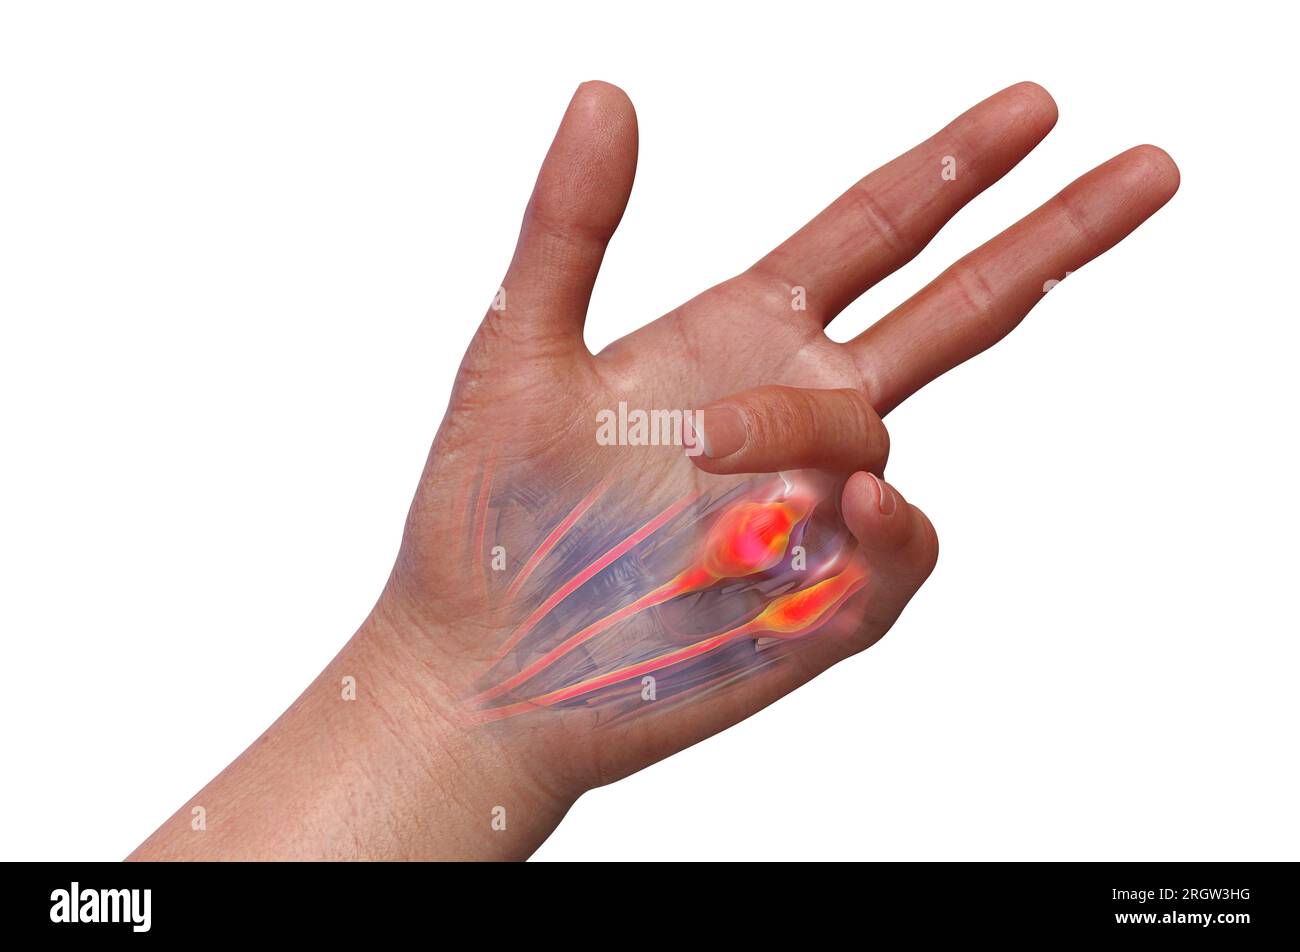 Dupuytren's contracture, illustration Stock Photo